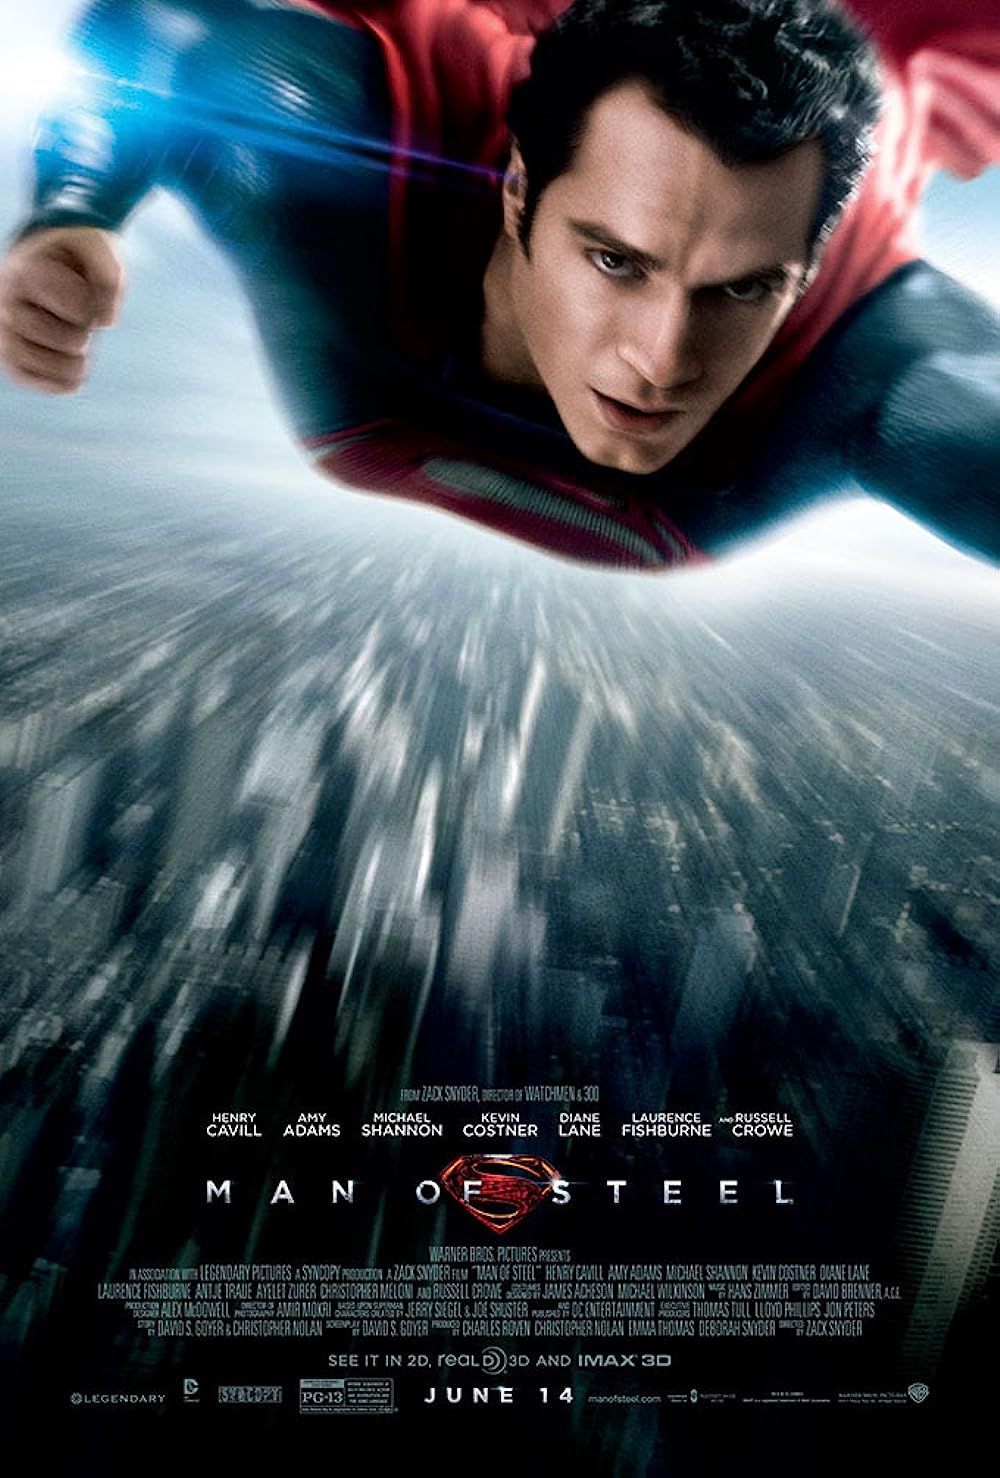 Henry Cavill as Superman on the Man of Steel poster